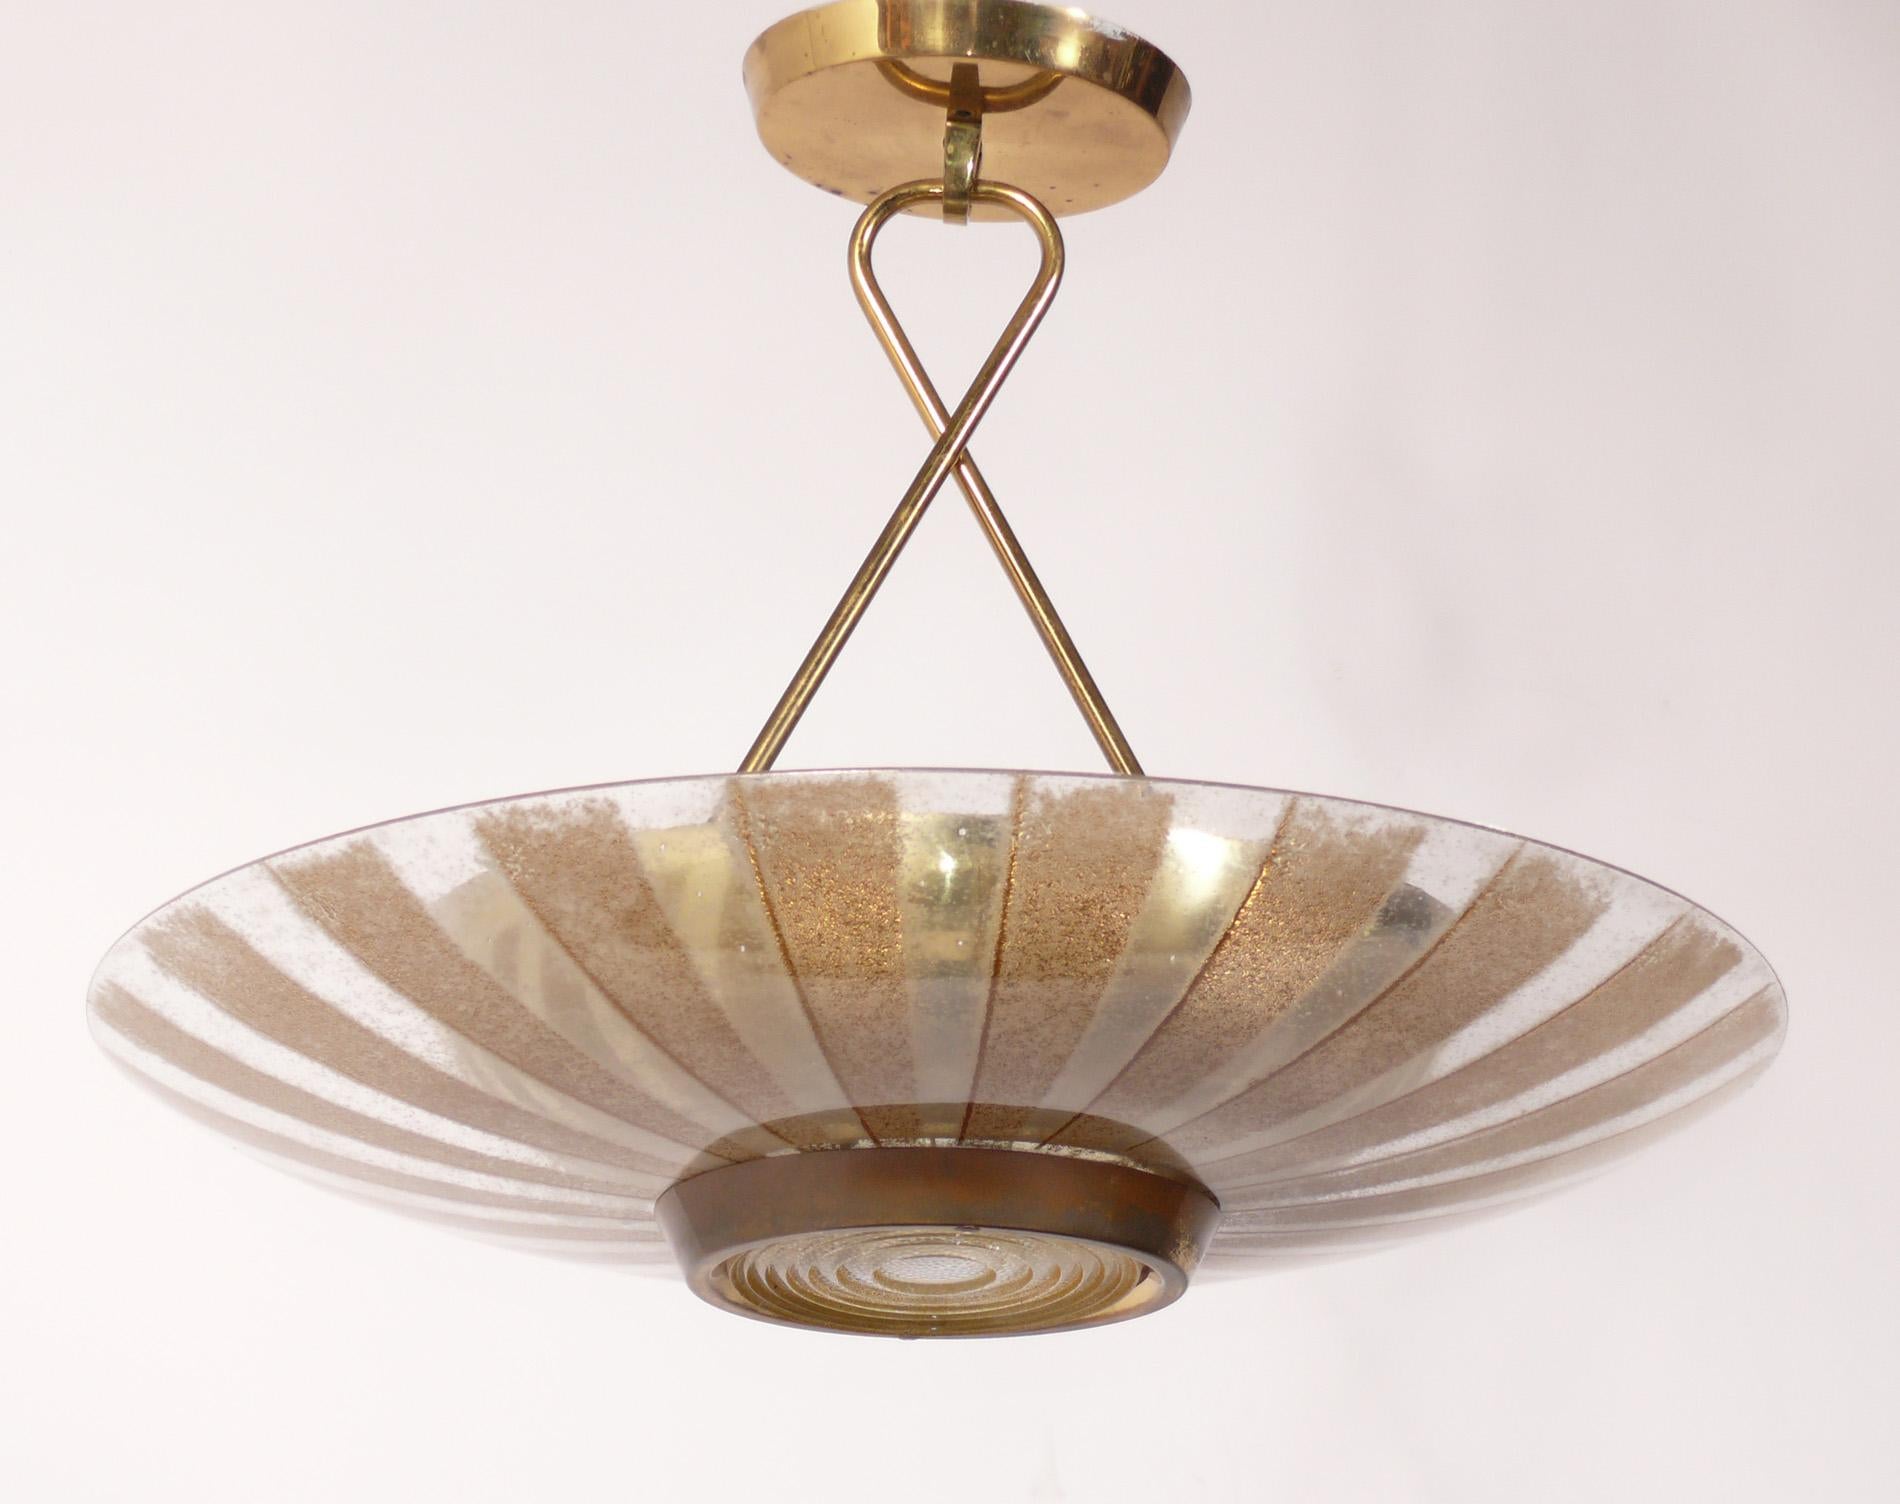 Elegant brass and glass chandelier, the design attributed to Paavo Tynell for Lightolier, circa 1950s. Signed with partial Lightolier label inside original ceiling cap. It has been rewired and is ready to mount. Please see similar Tynell designs